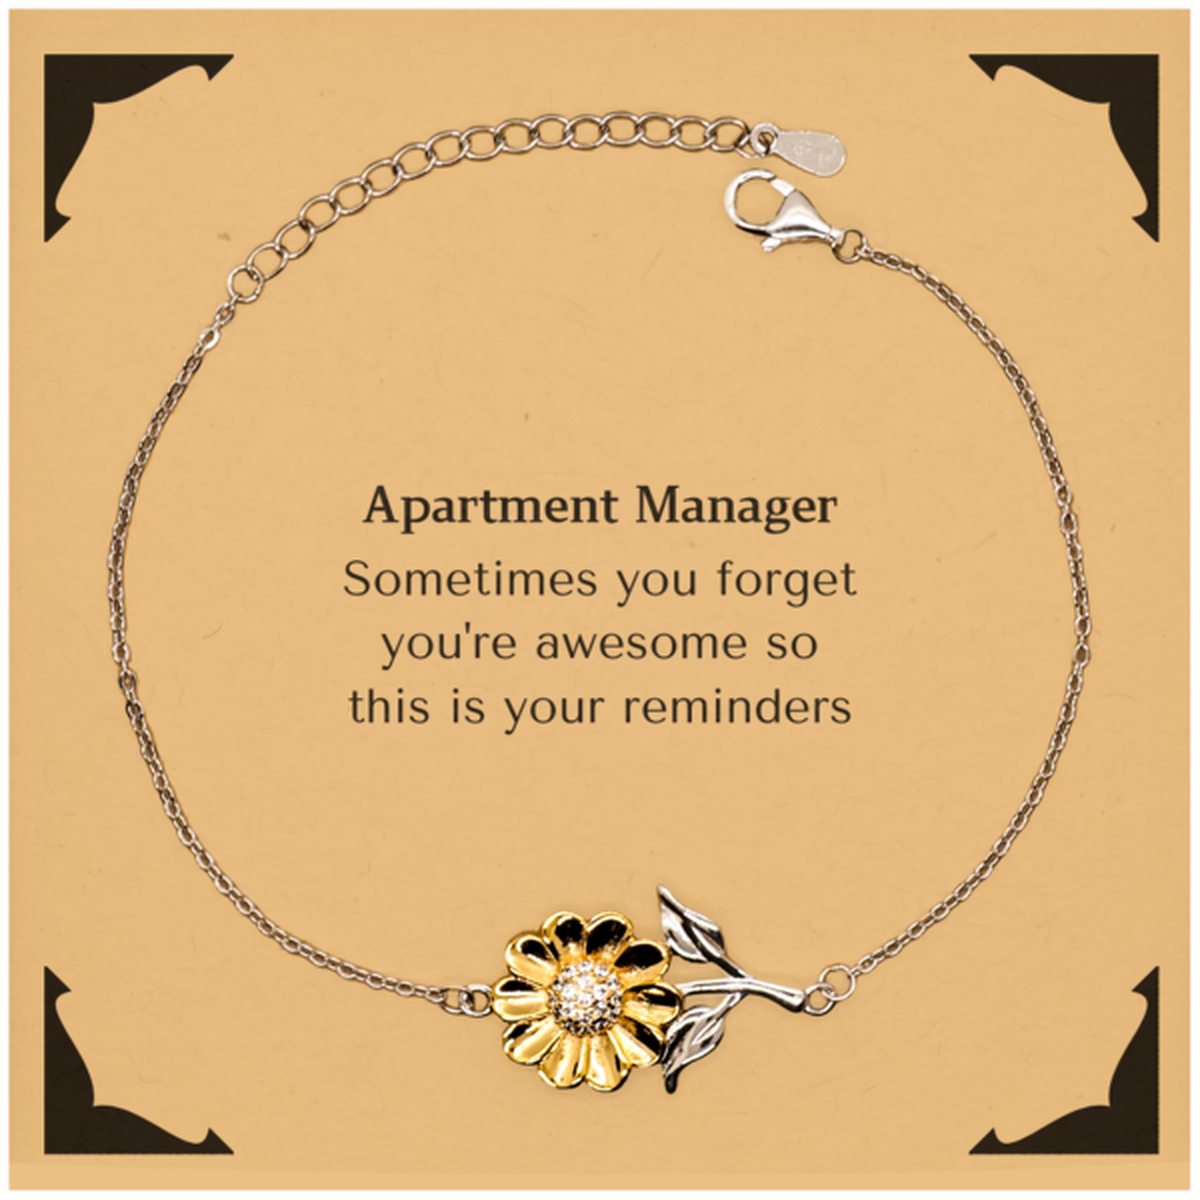 Sentimental Apartment Manager Sunflower Bracelet, Apartment Manager Sometimes you forget you're awesome so this is your reminders, Graduation Christmas Birthday Gifts for Apartment Manager, Men, Women, Coworkers